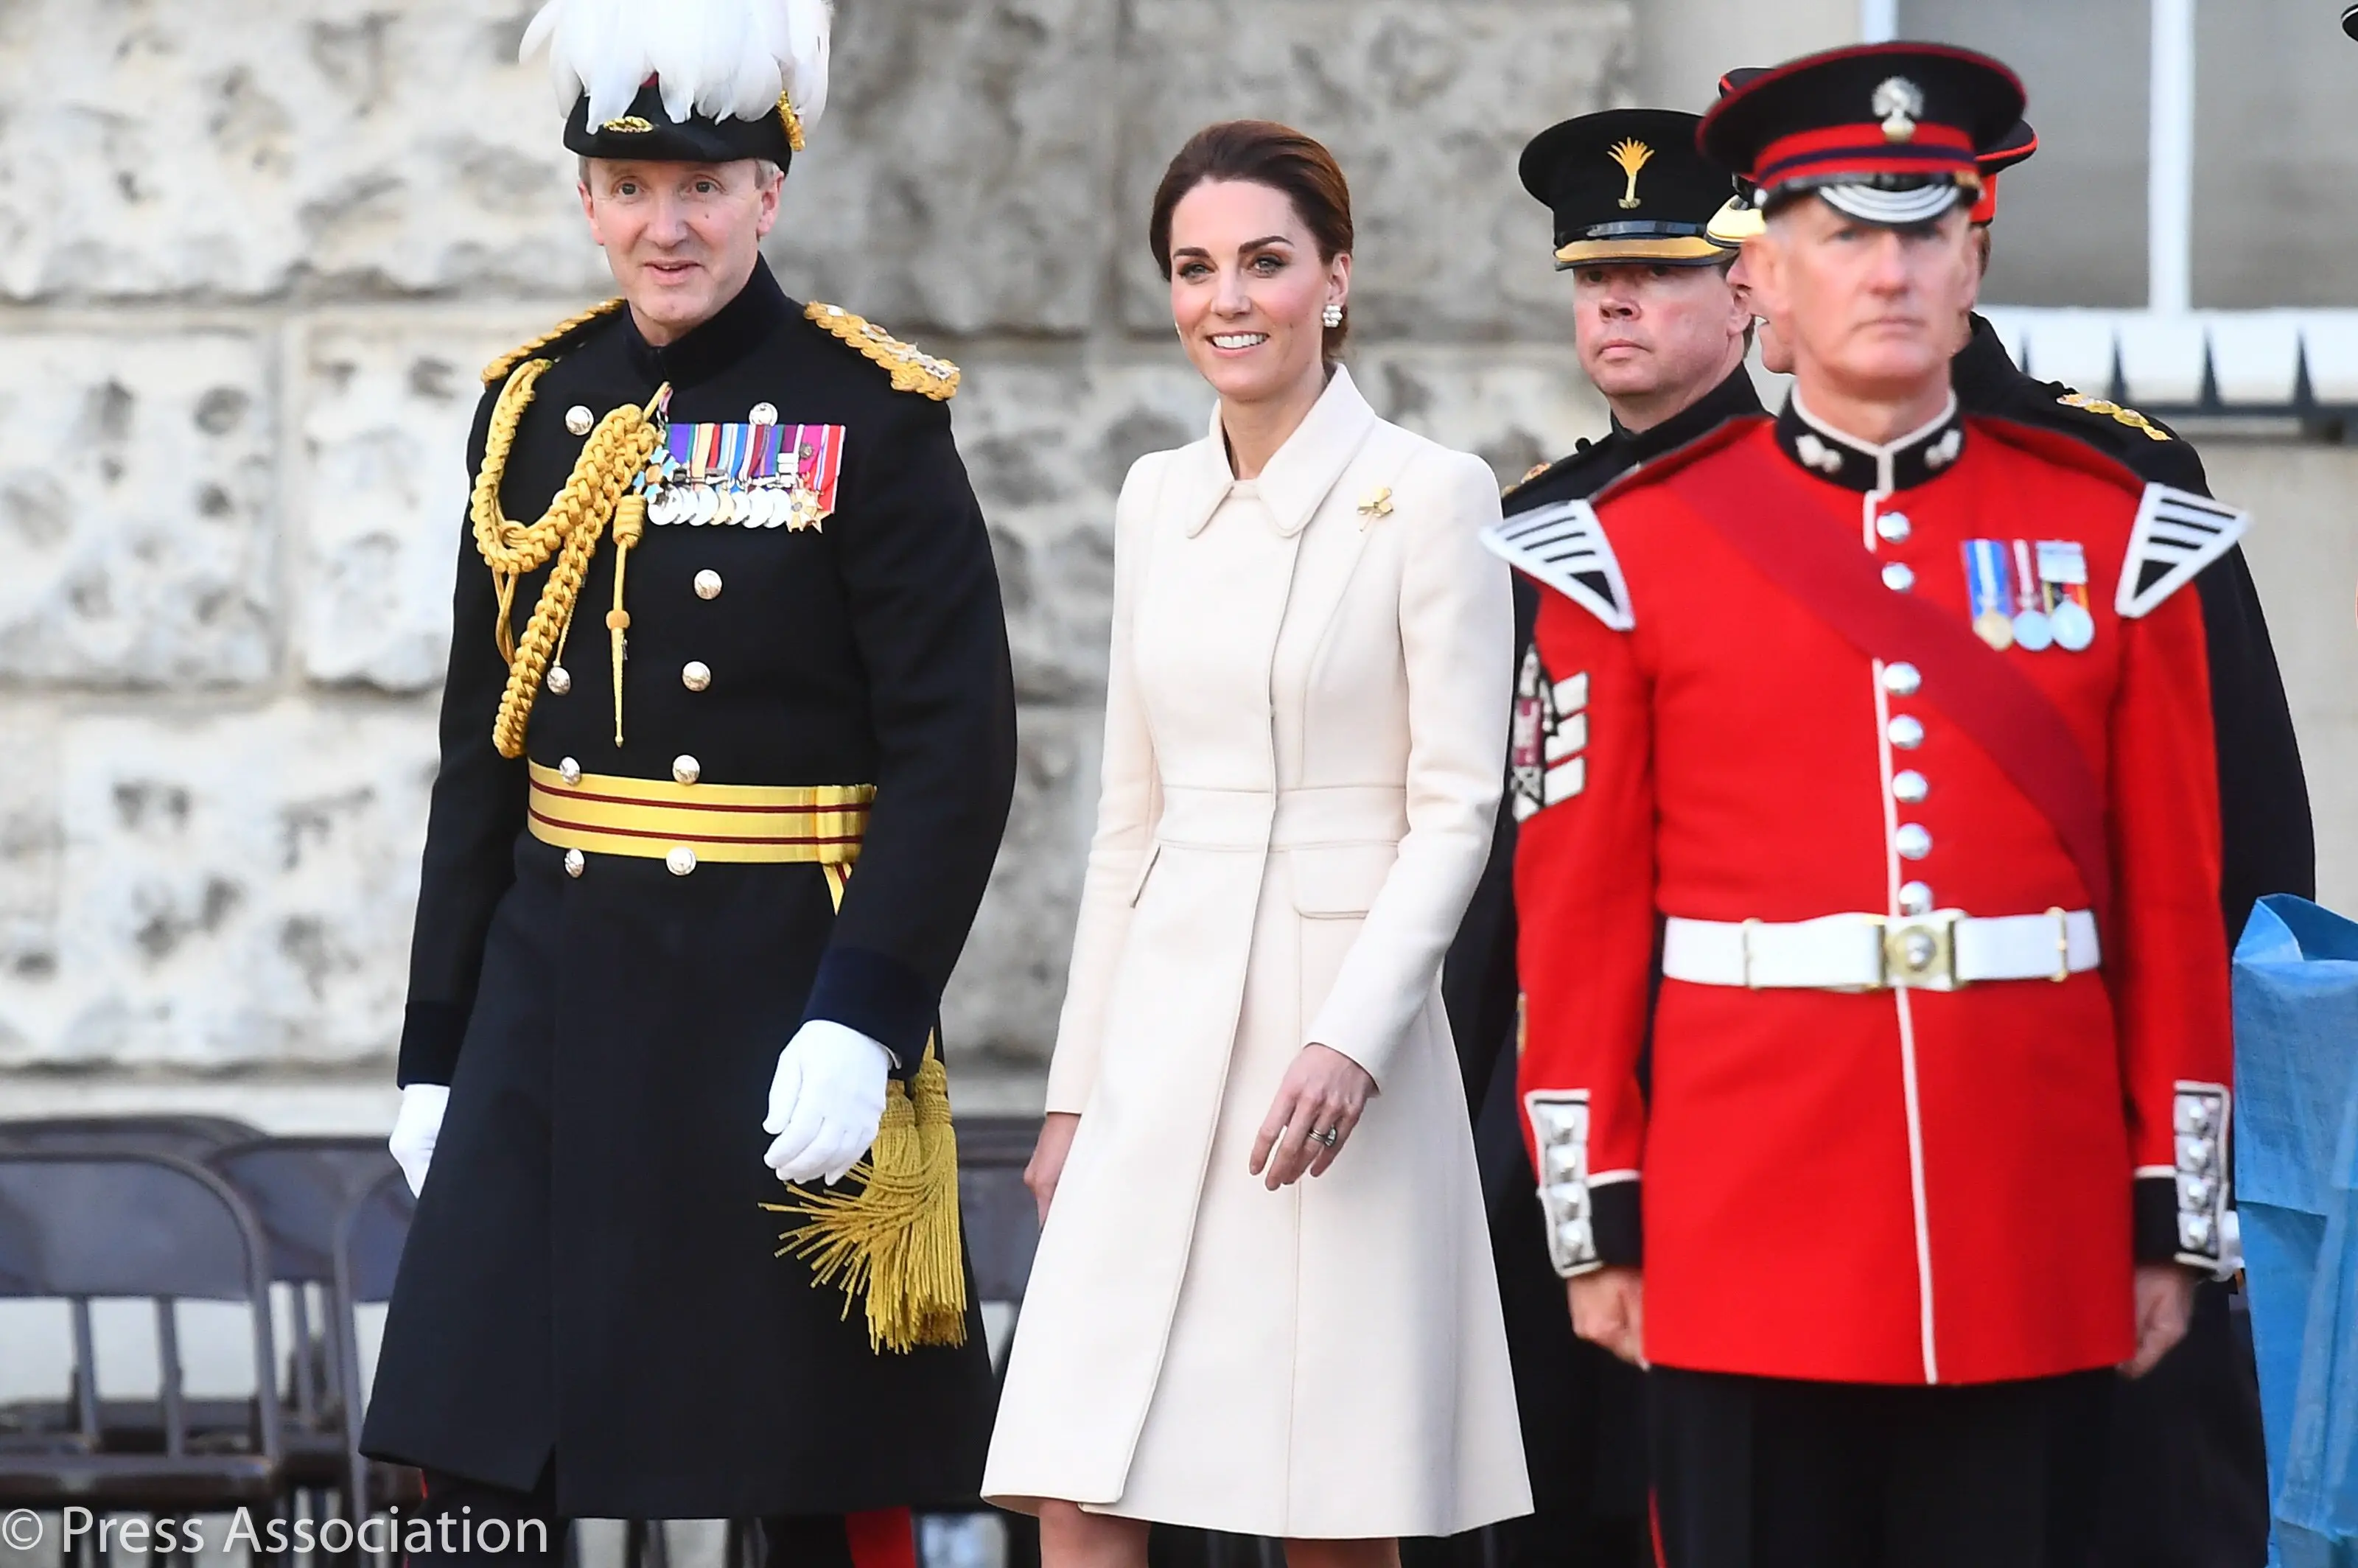 Duchess of Cambridge at Beating the Retreat Ceremony